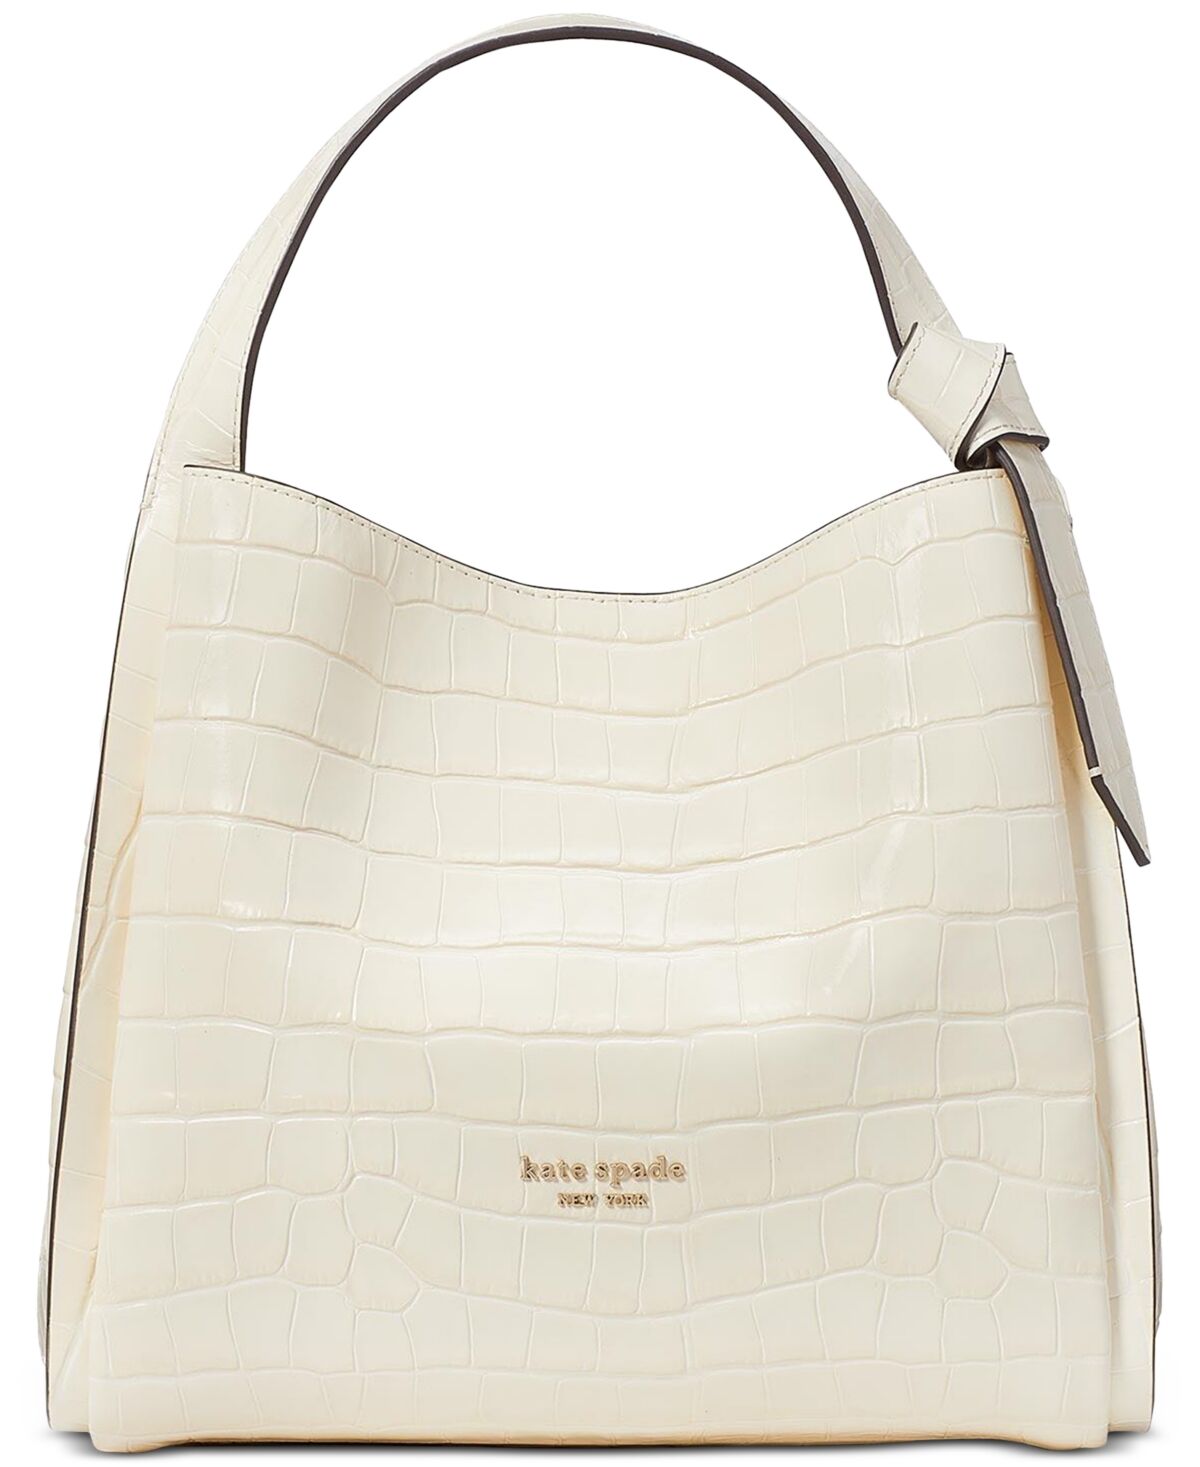 kate spade new york Knott Croc Embossed Leather Small Crossbody Tote - Halo White